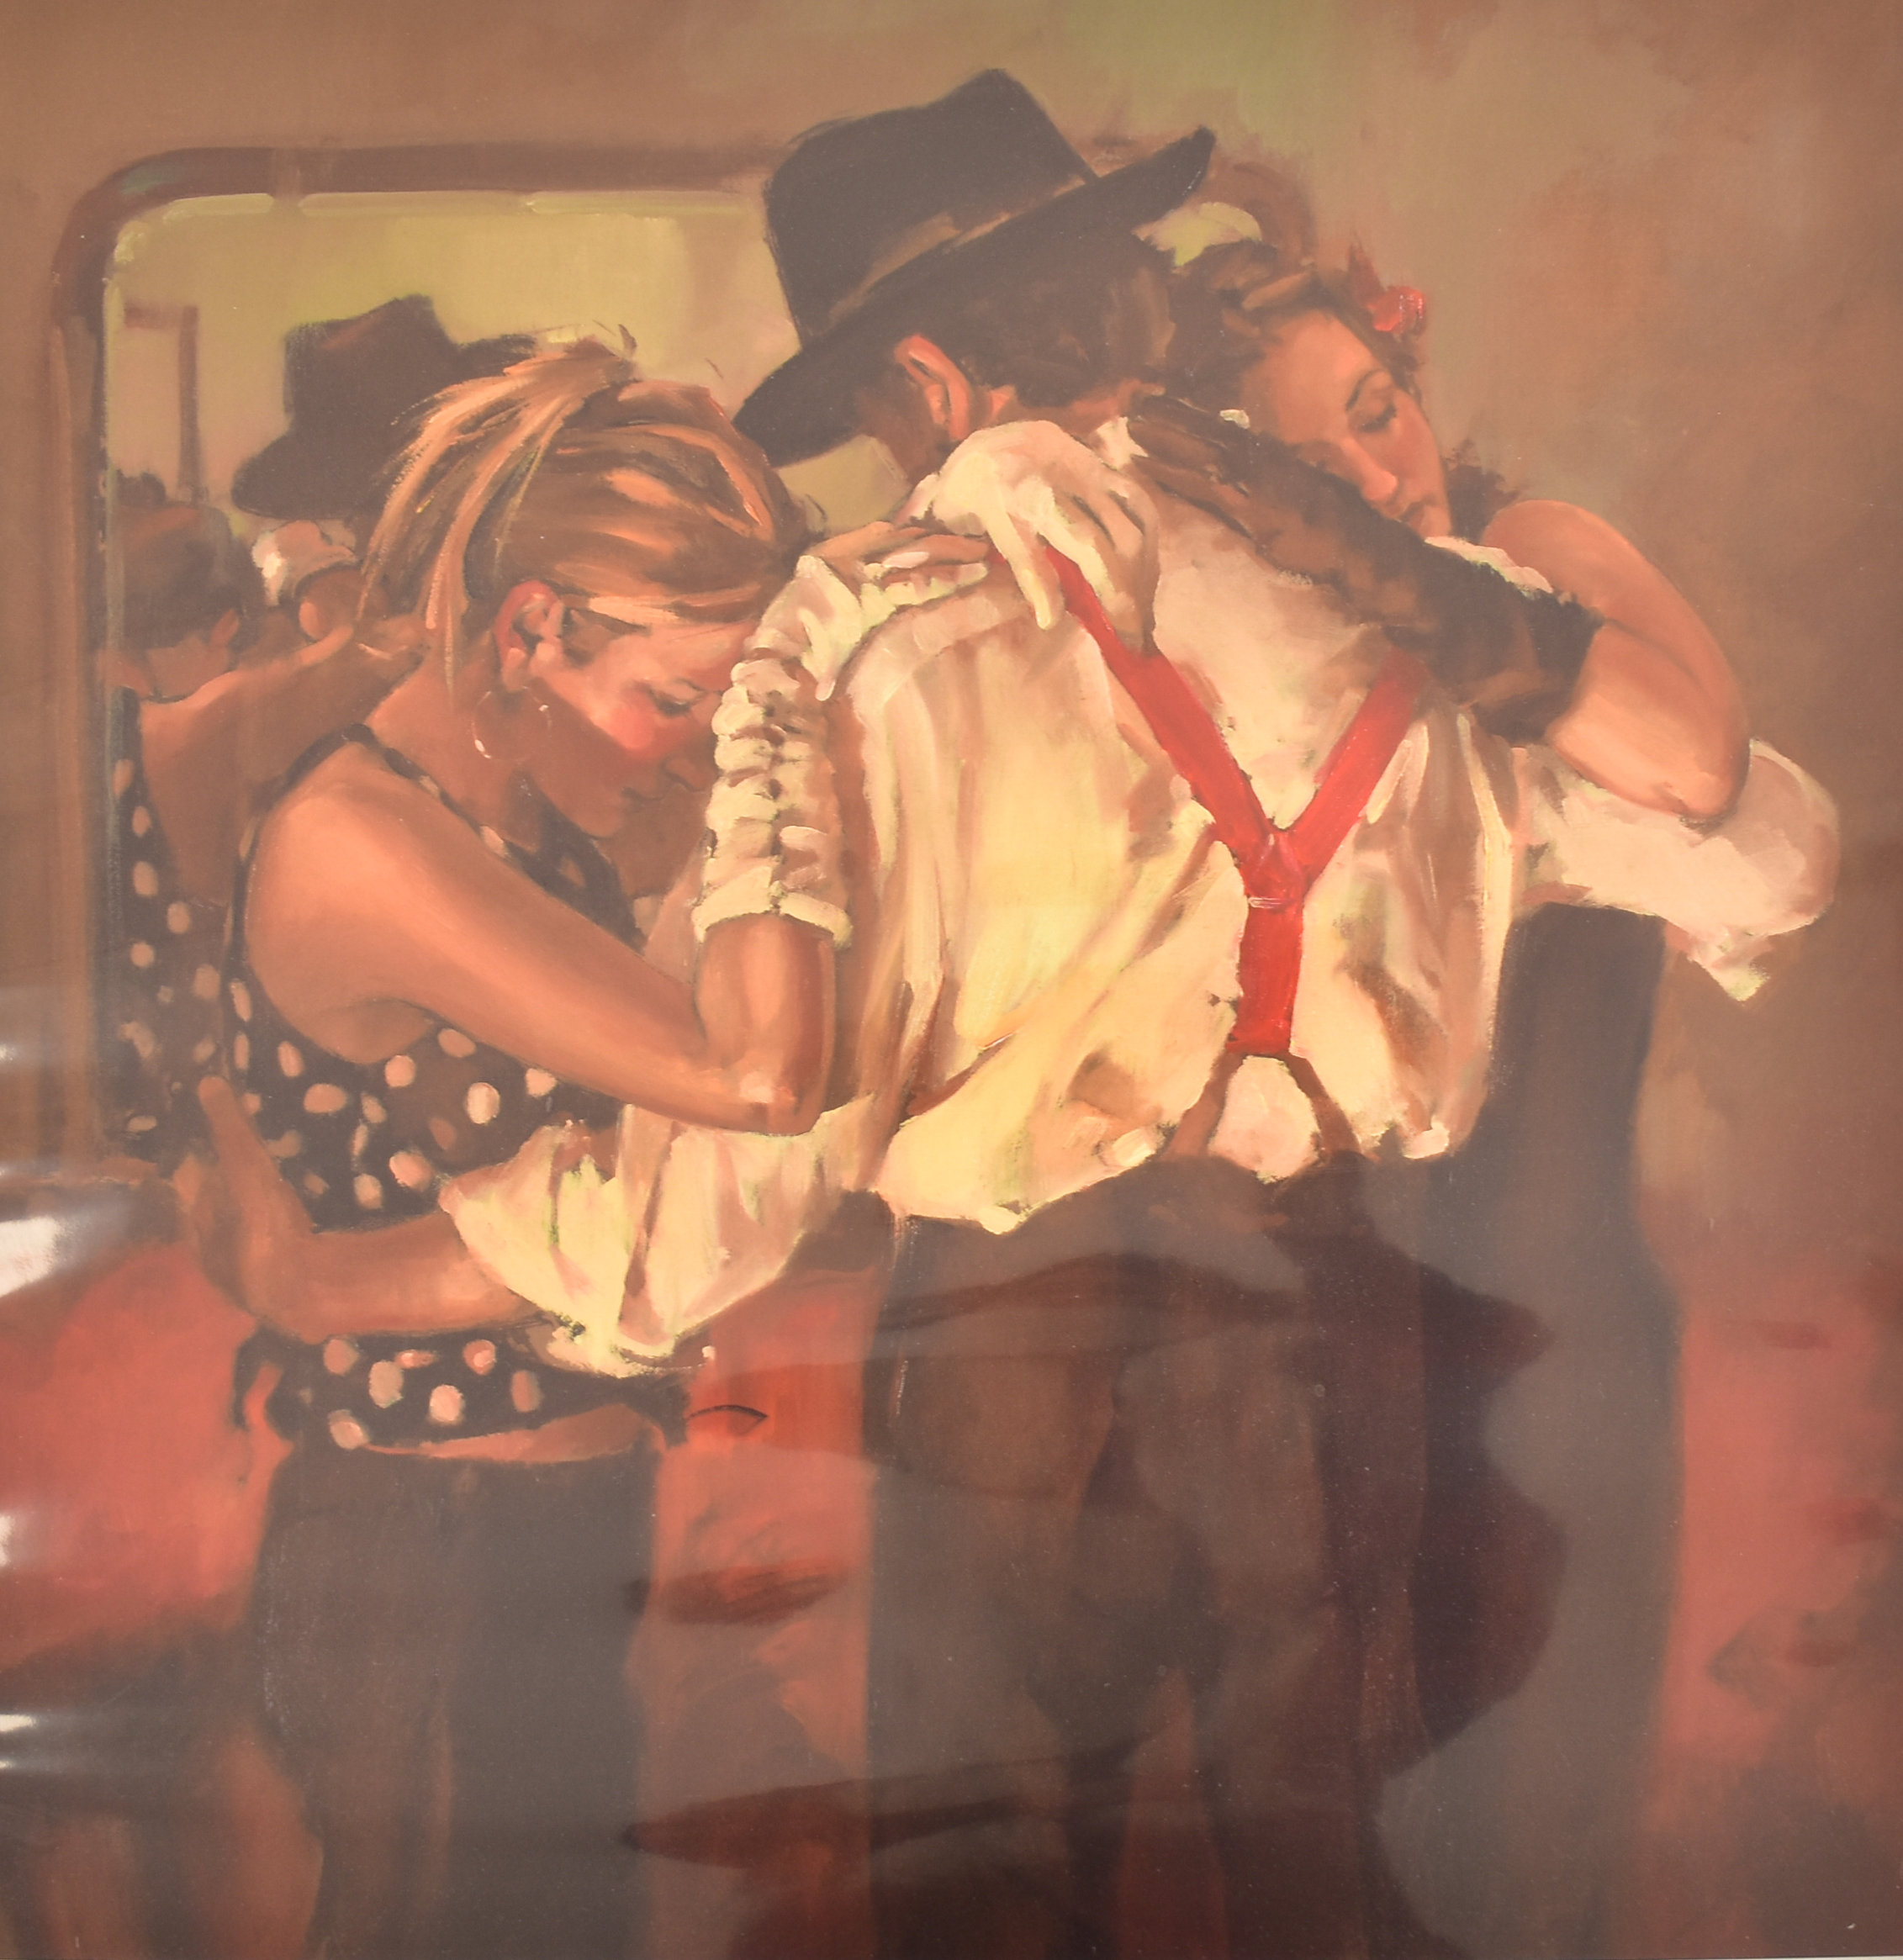 RAYMOND LEECH (B. 1949) - ANOTHER ONE OF THOSE CRAZY FEELINGS - Image 3 of 8